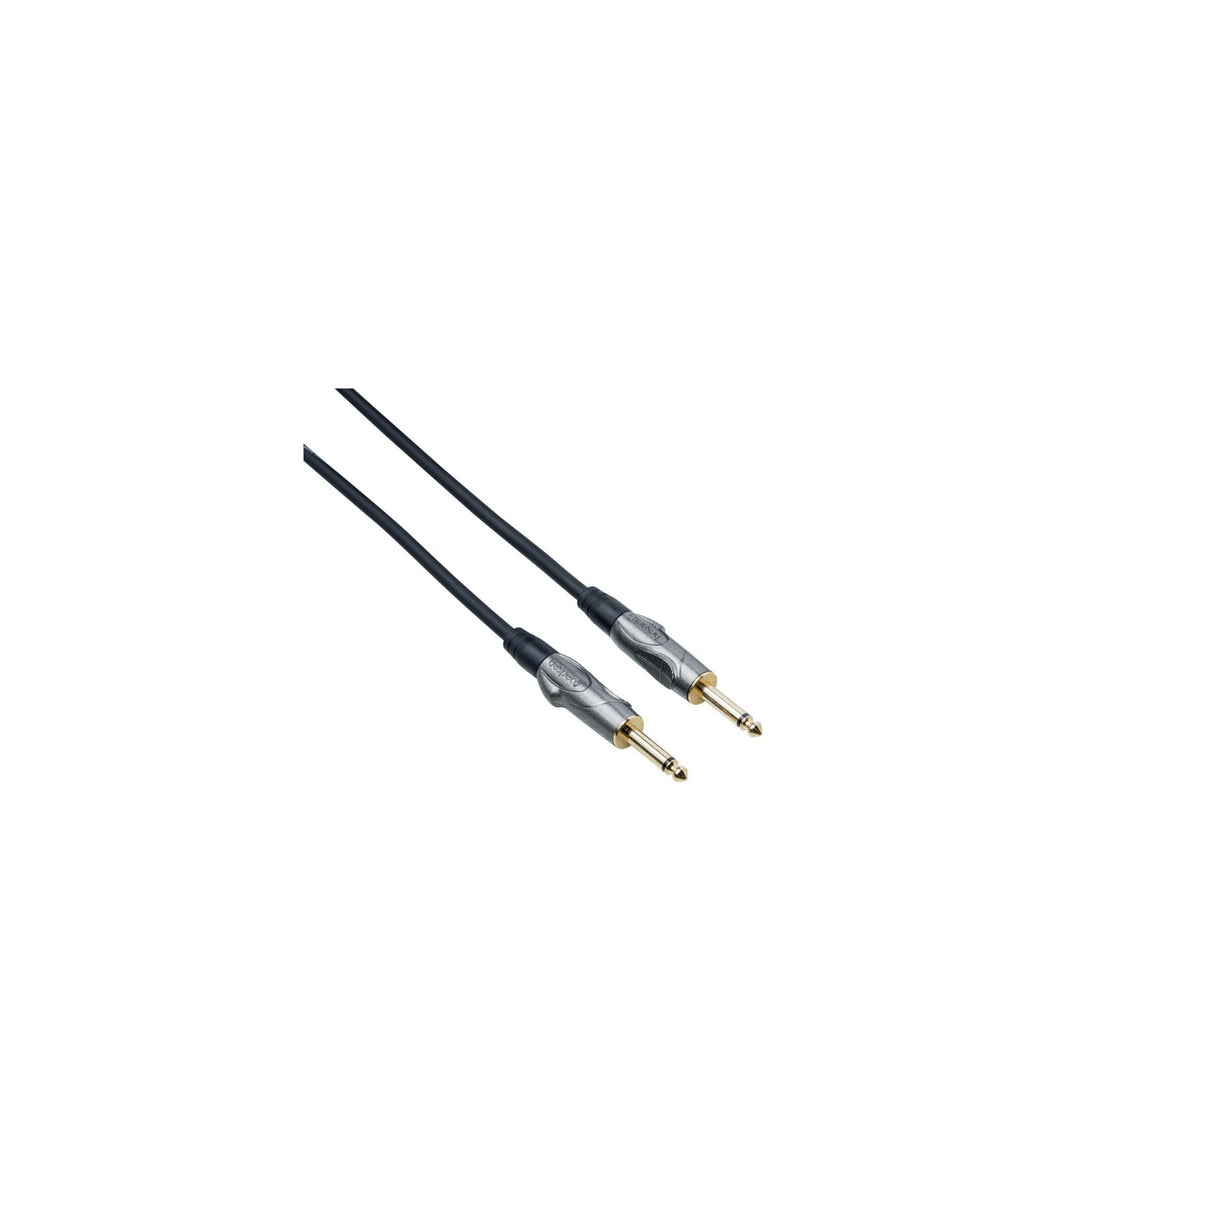 Bespeco TT450 Titanium Series Straight Angle 1/4 Inch to 1/4 Inch Guitar Cable, 13 Foot